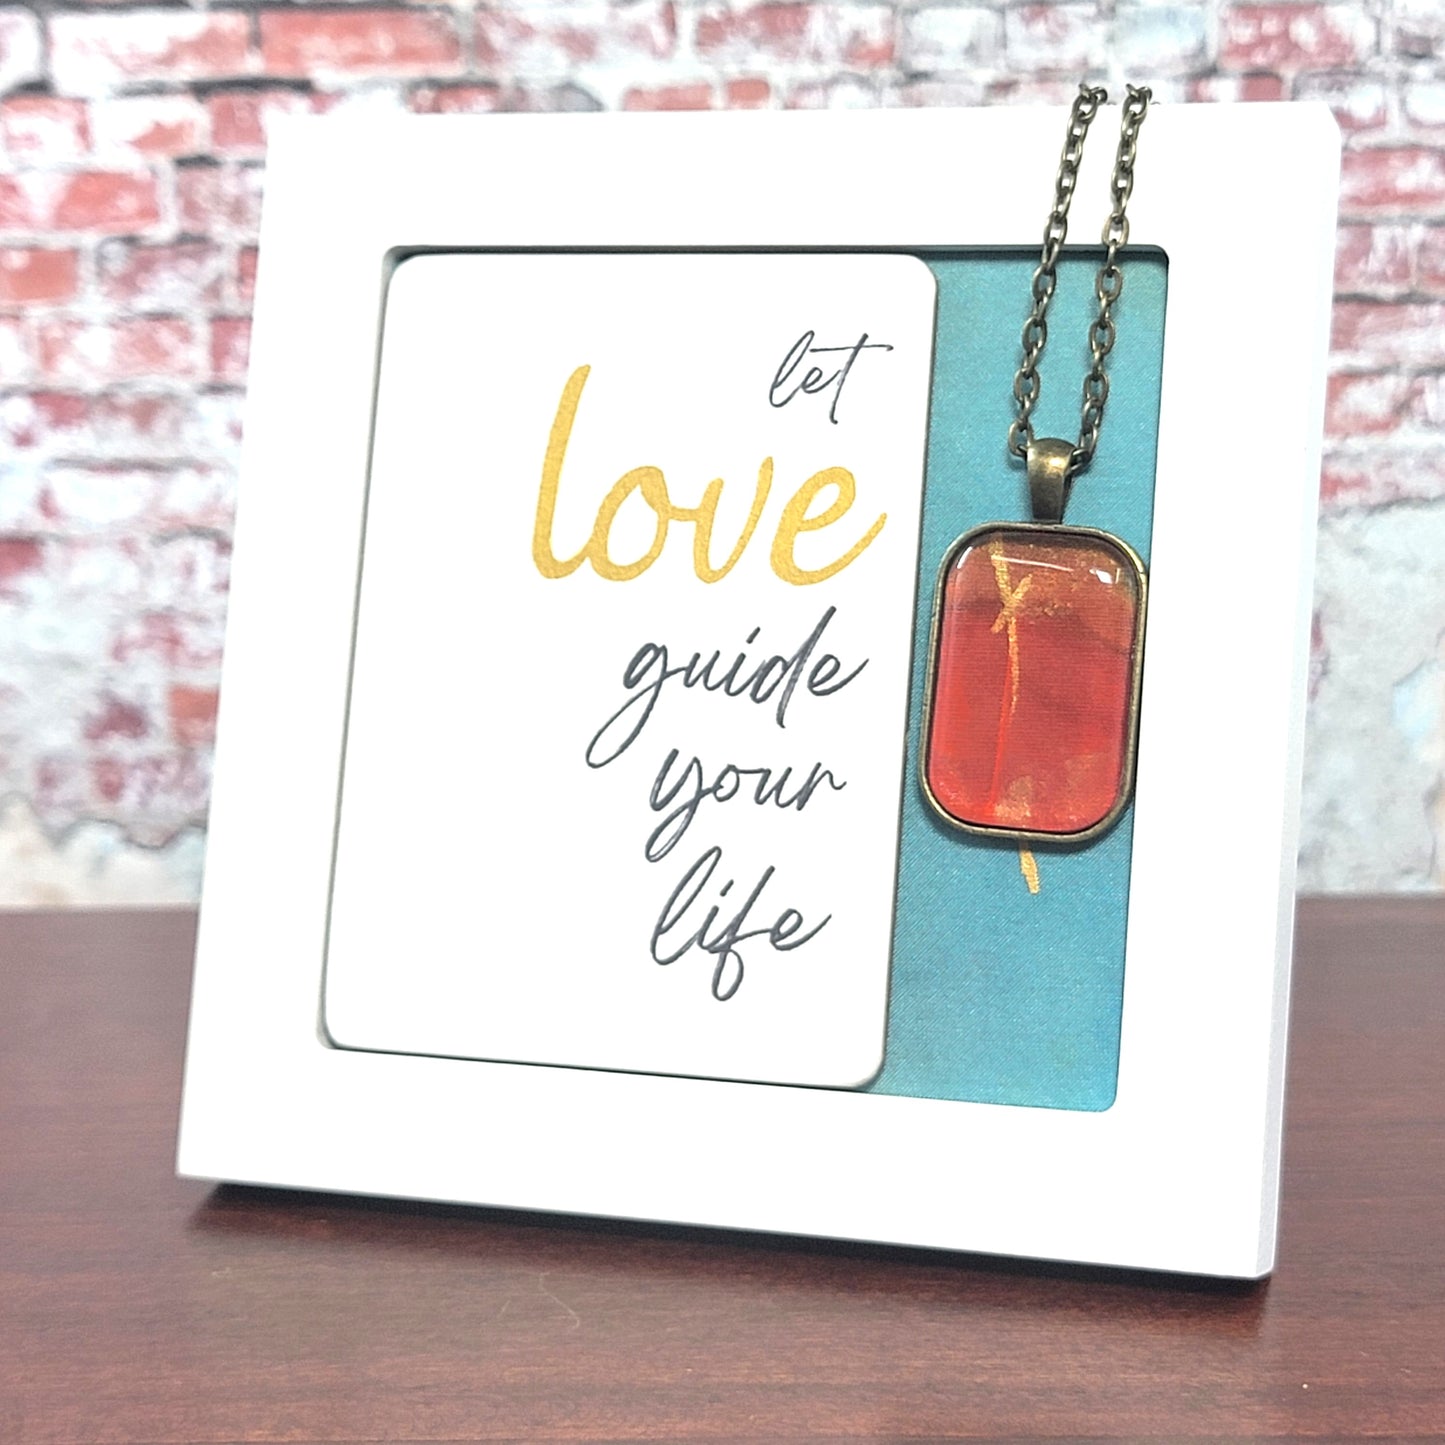 Cross Necklace Holder - Let Love guide your life (238)